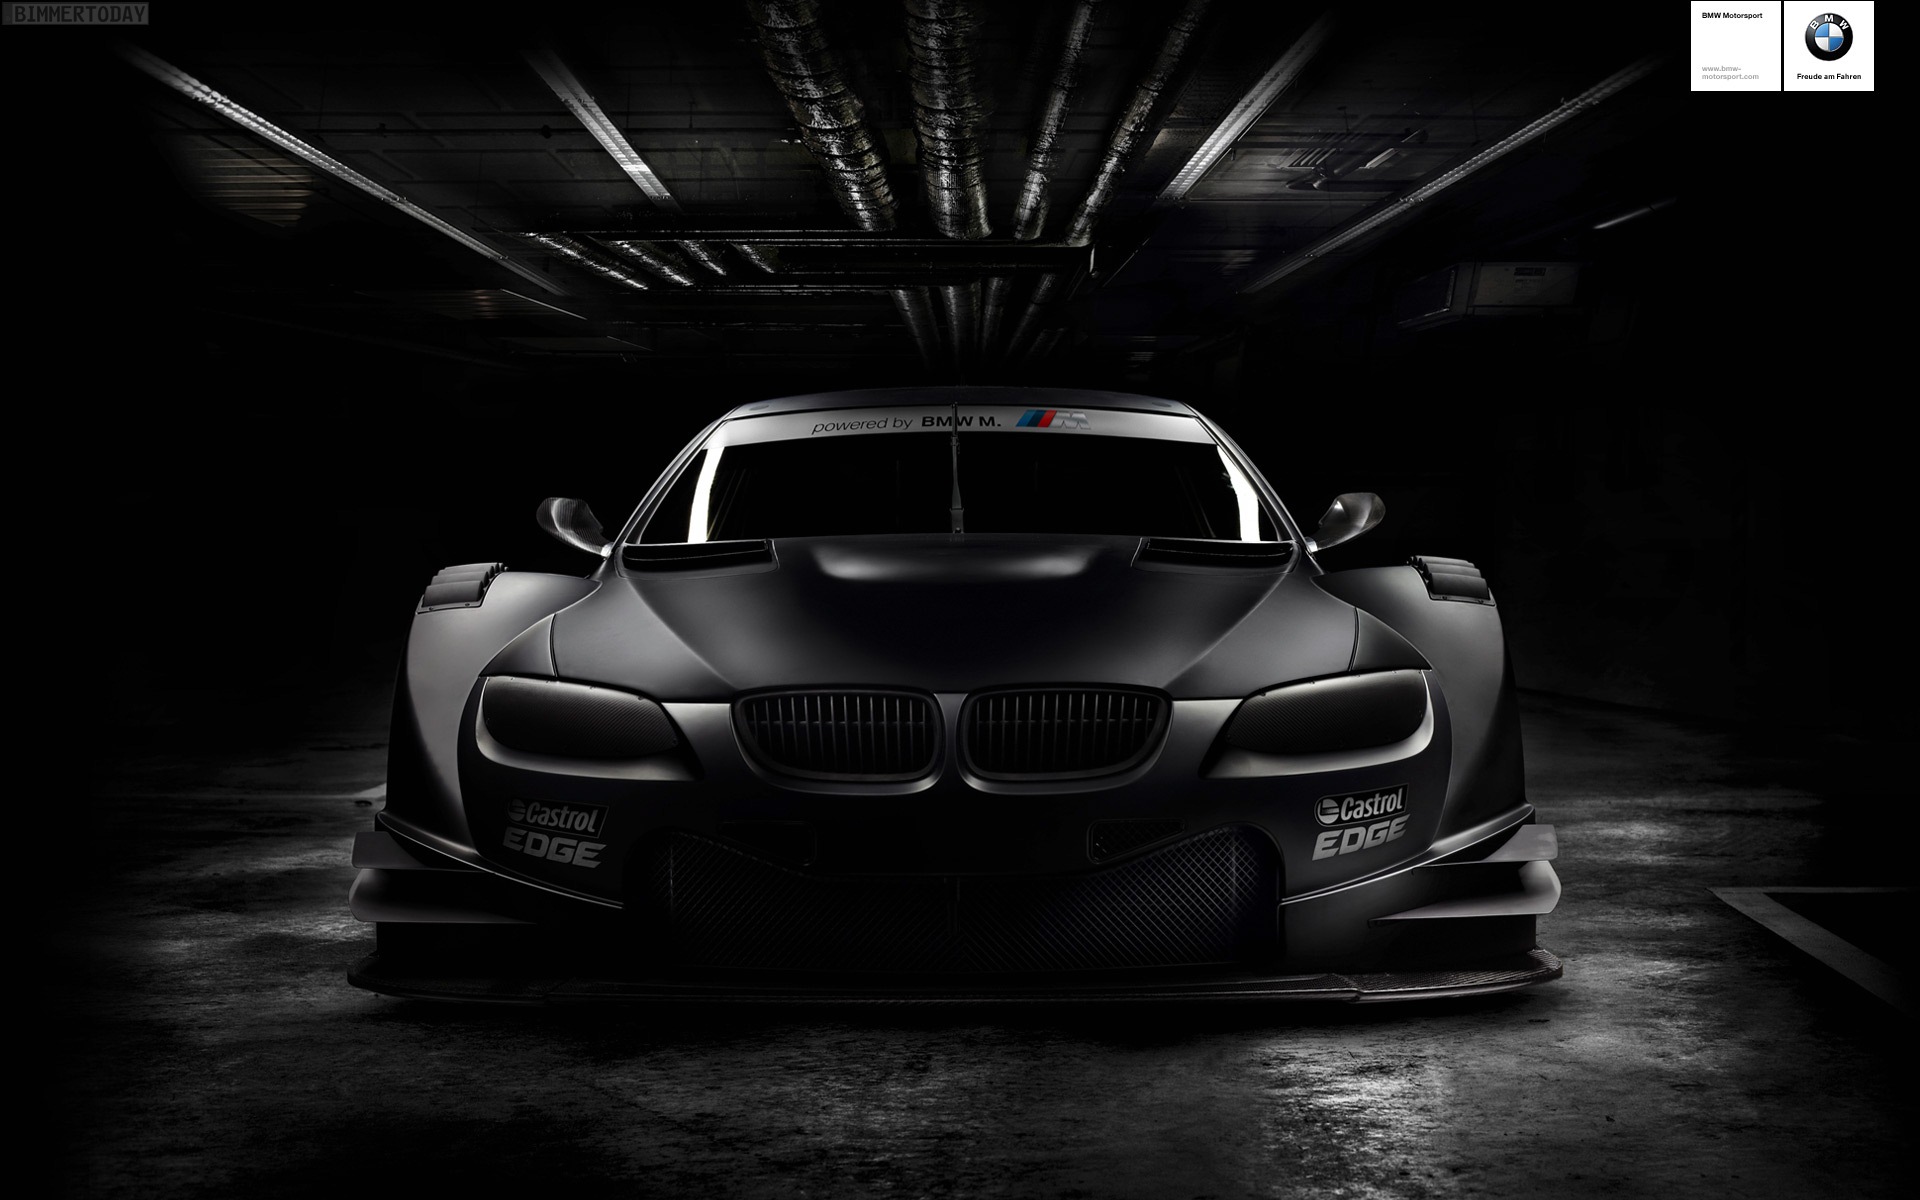 Wallpapers Hd Cars Bmw